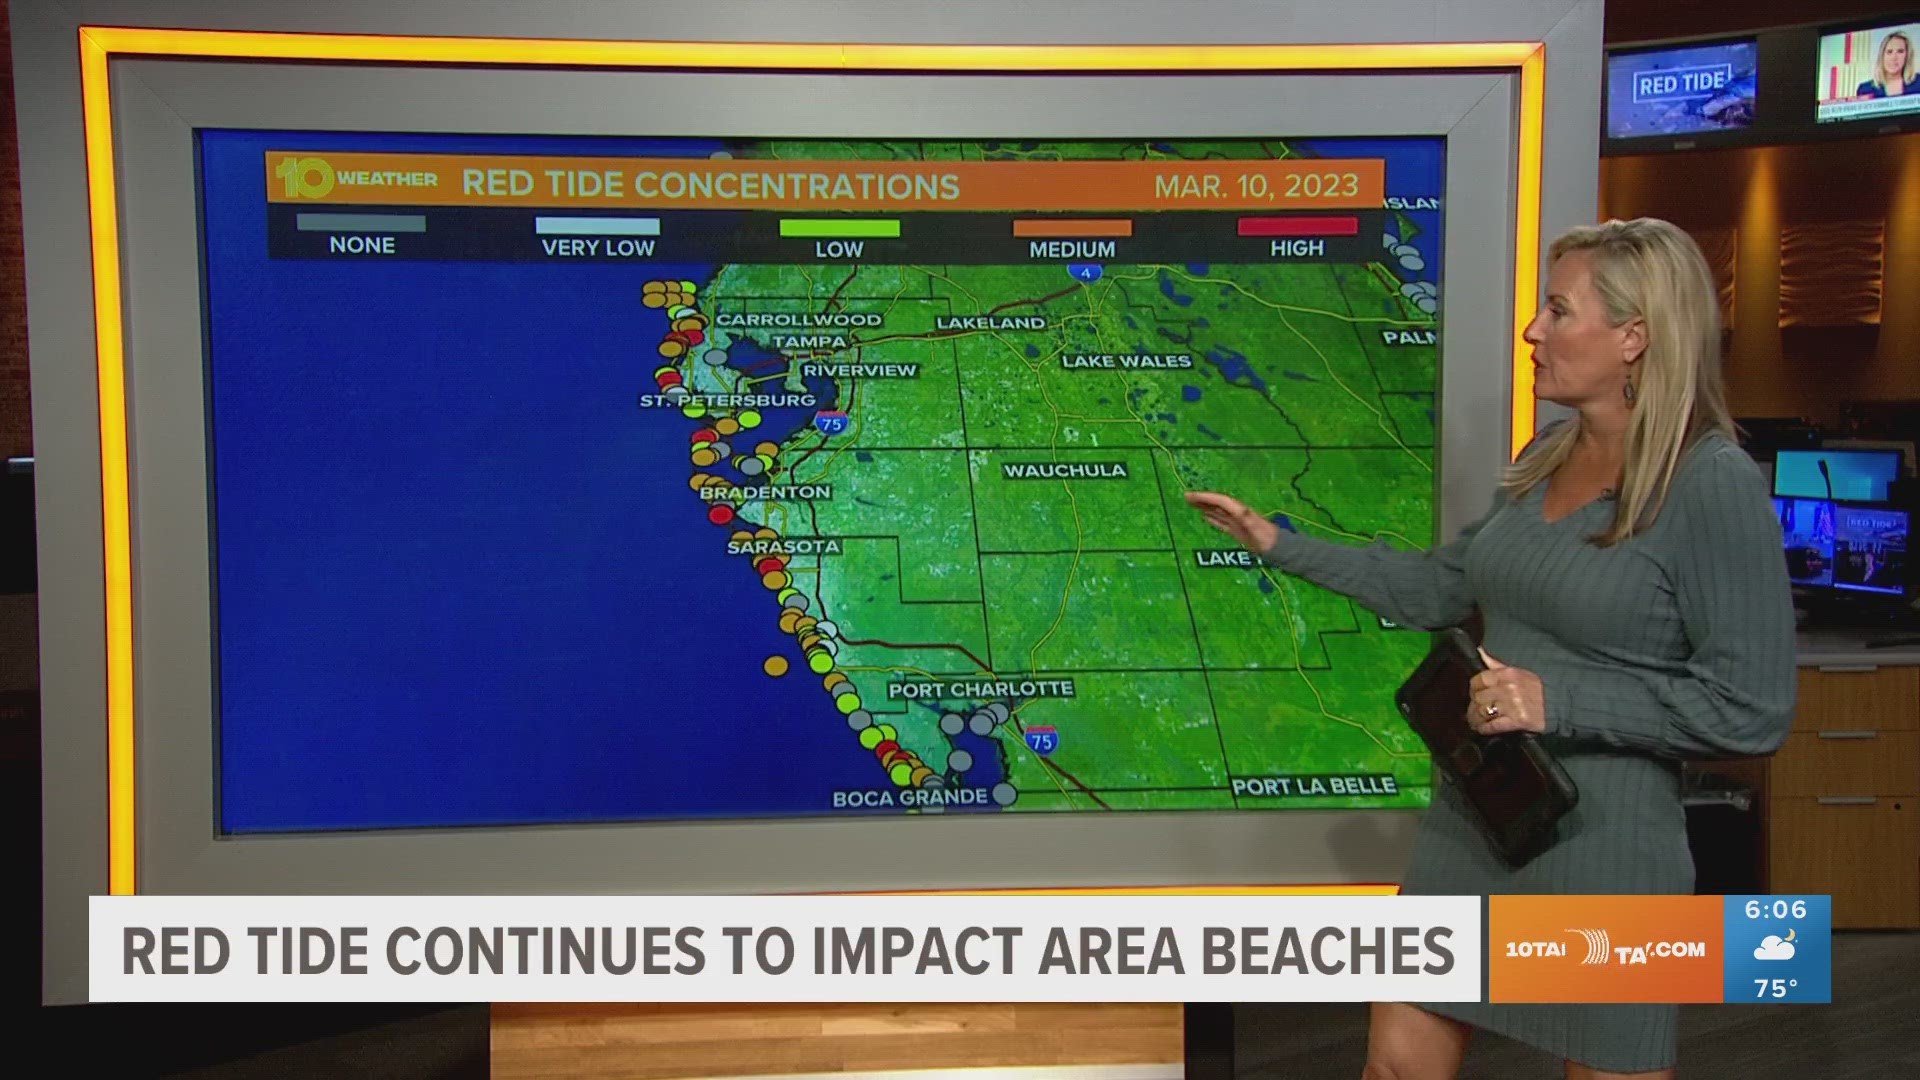 Current red tide conditions include medium to high levels at beaches from Clearwater to Sarasota.